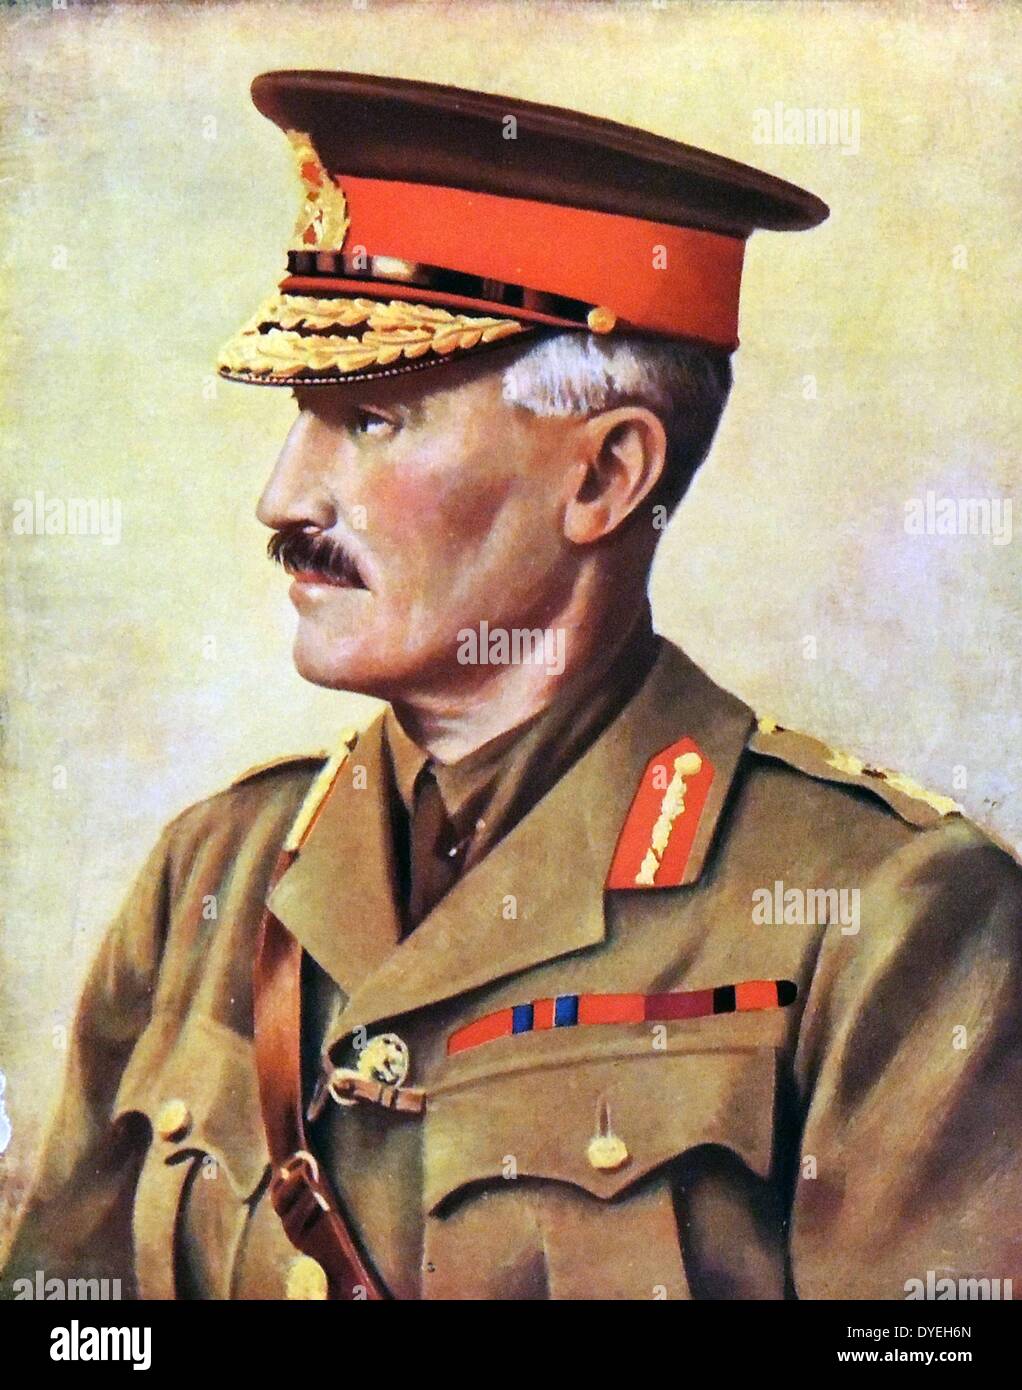 General Sir Henry Sinclair Horne (1861-1929) commanded the British first army from September 1916 until the end of the First World War. Stock Photo